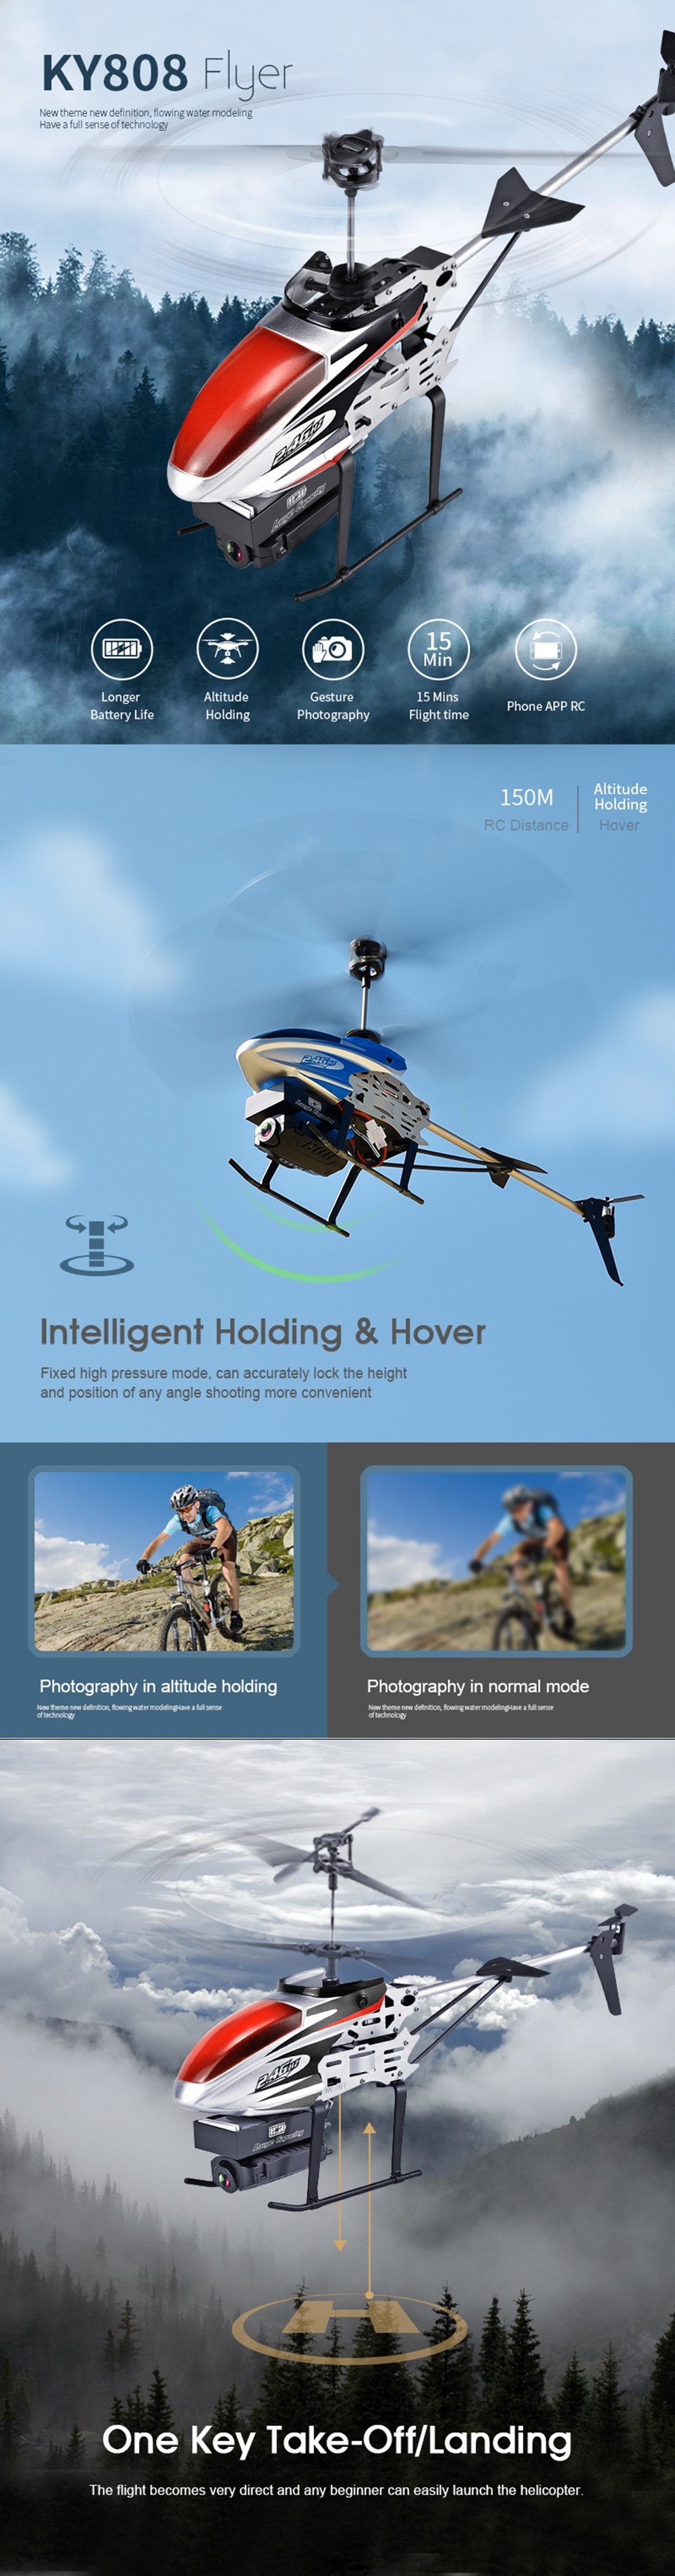 KY808 KY808W 2.4G 4CH 6 Aixs Hover Altitude Hold Wifi APP Control RC Helicopter With HD Camera